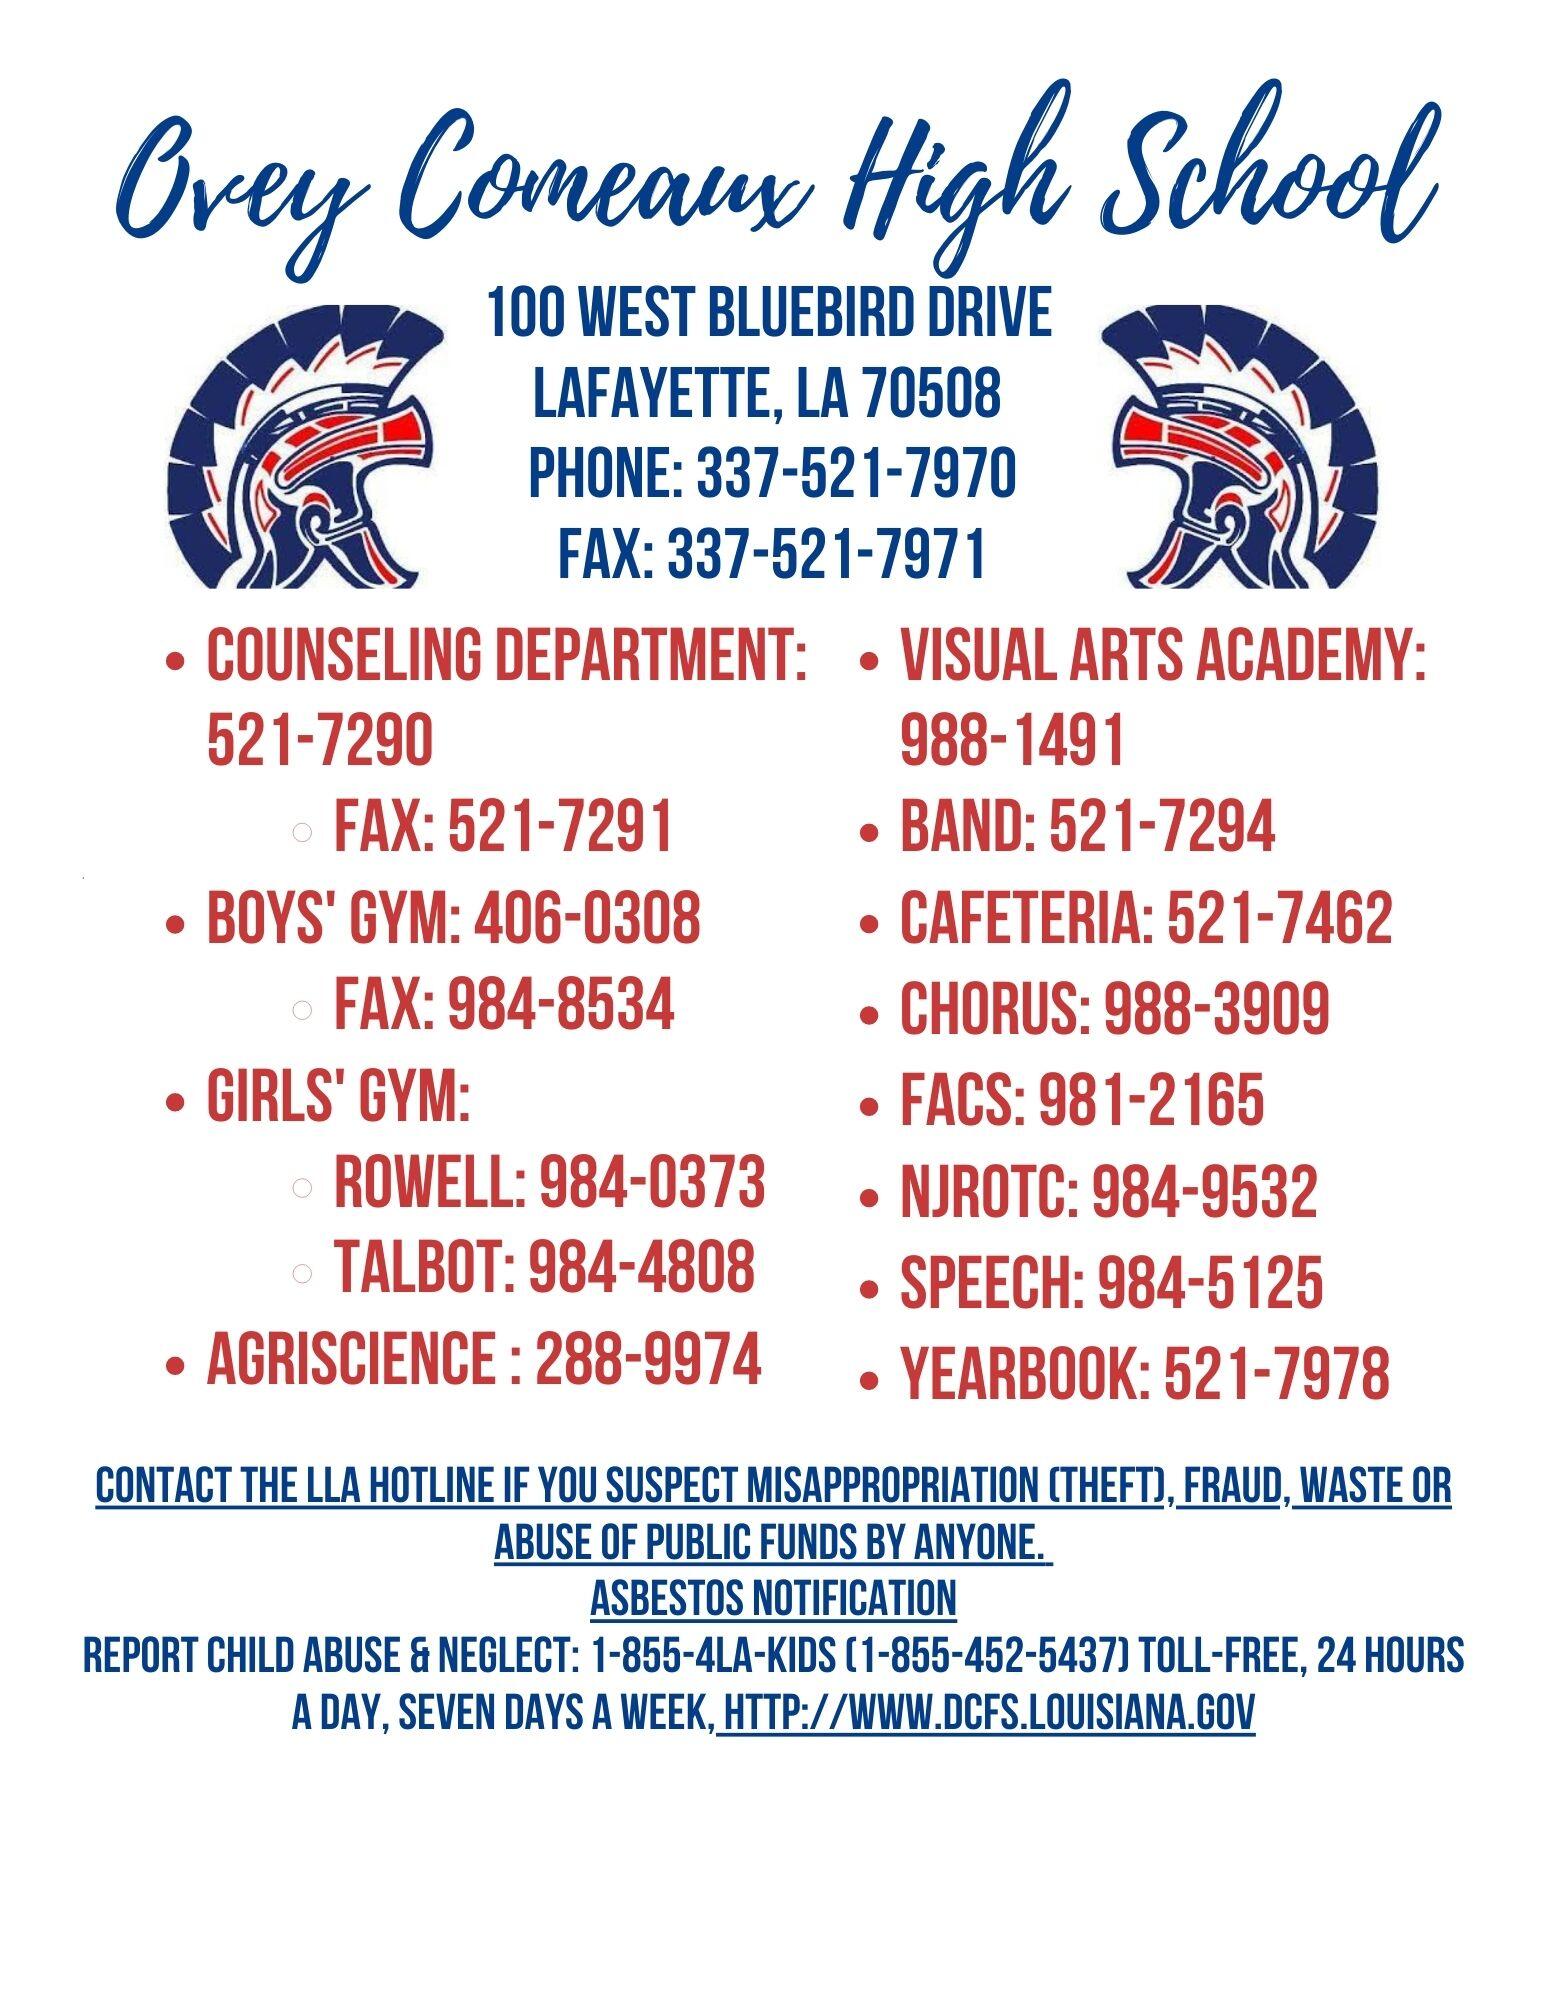 Important Contact numbers for OCHS